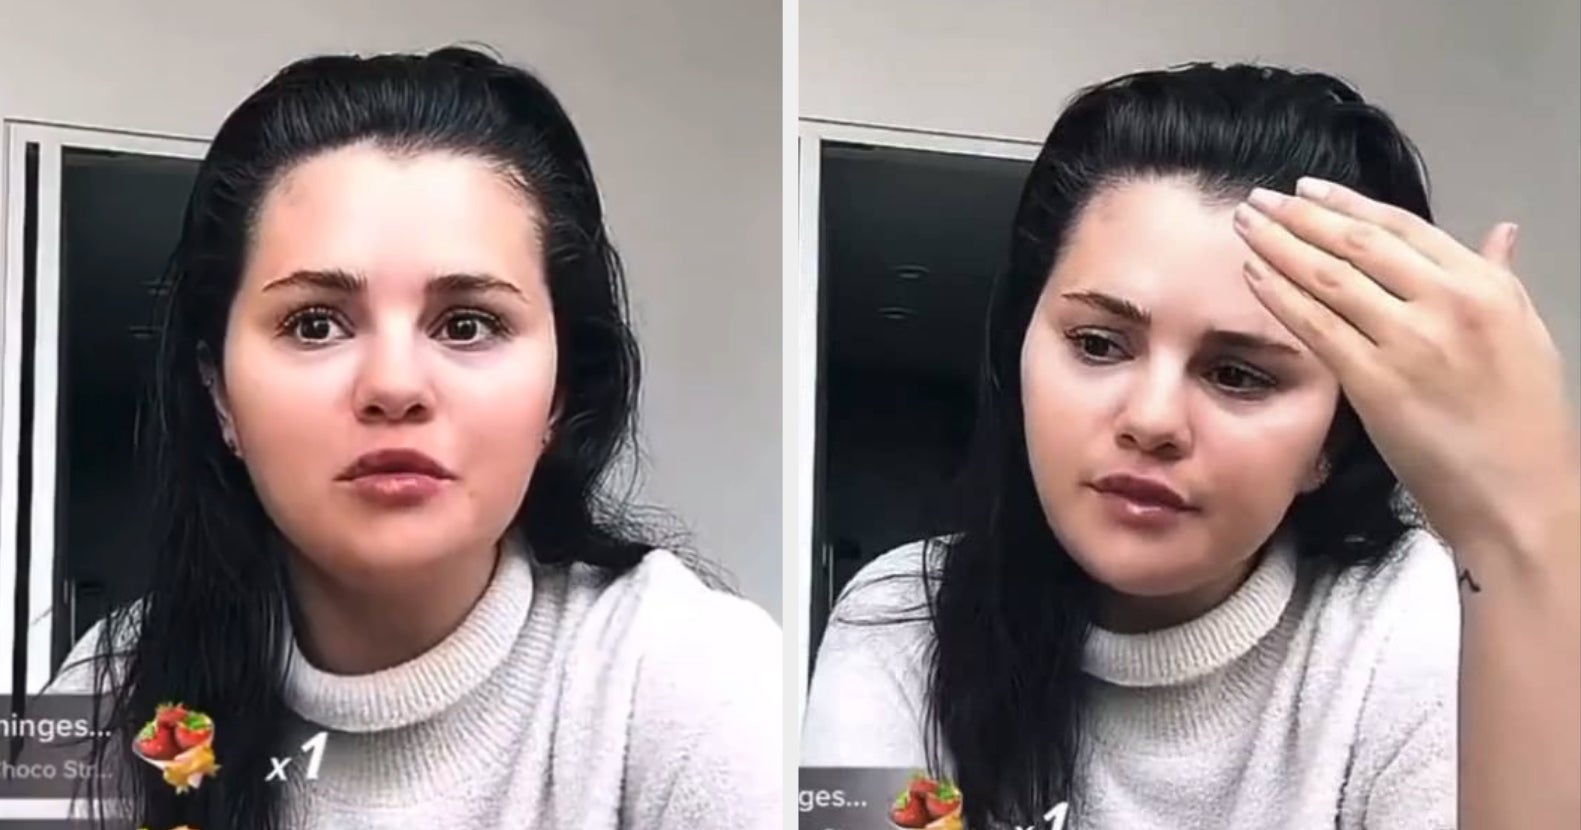 Fans Feel Really Sorry For Selena Gomez After She Was Forced To Explain Why She’s Gained Weight In Response To Harsh Body-Shaming Comments